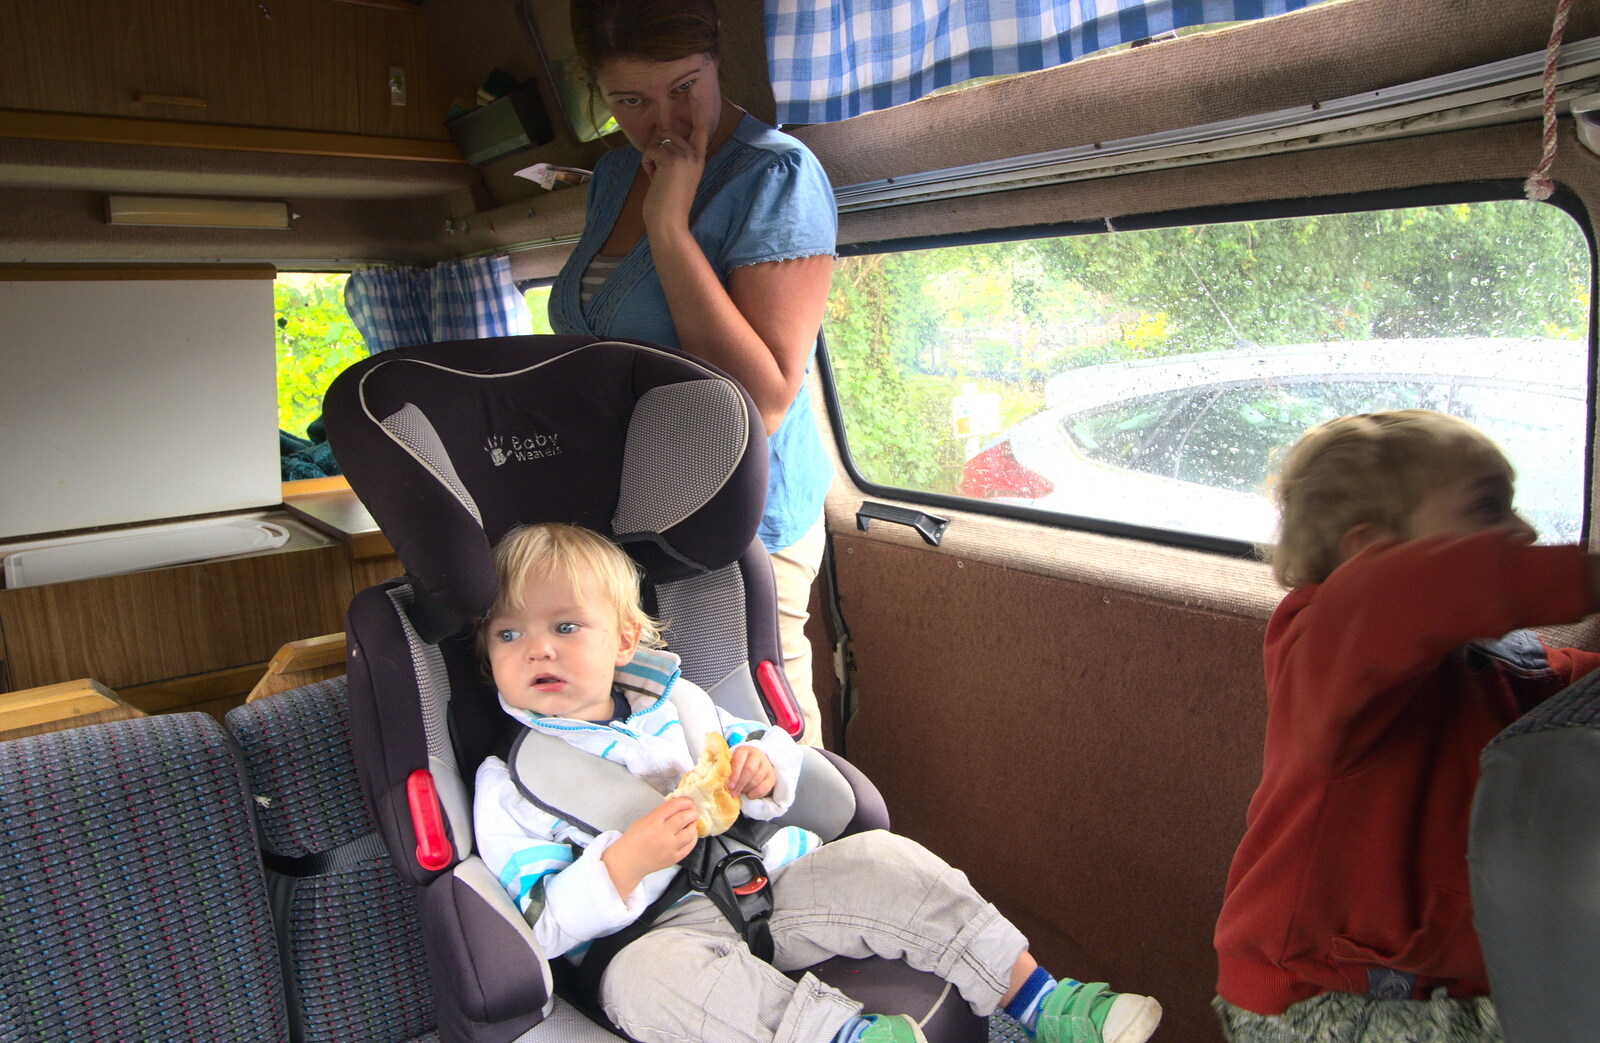 The gang in the van from Bressingham Gardens, and Building Progress, Brome, Suffolk - 26th August 2013